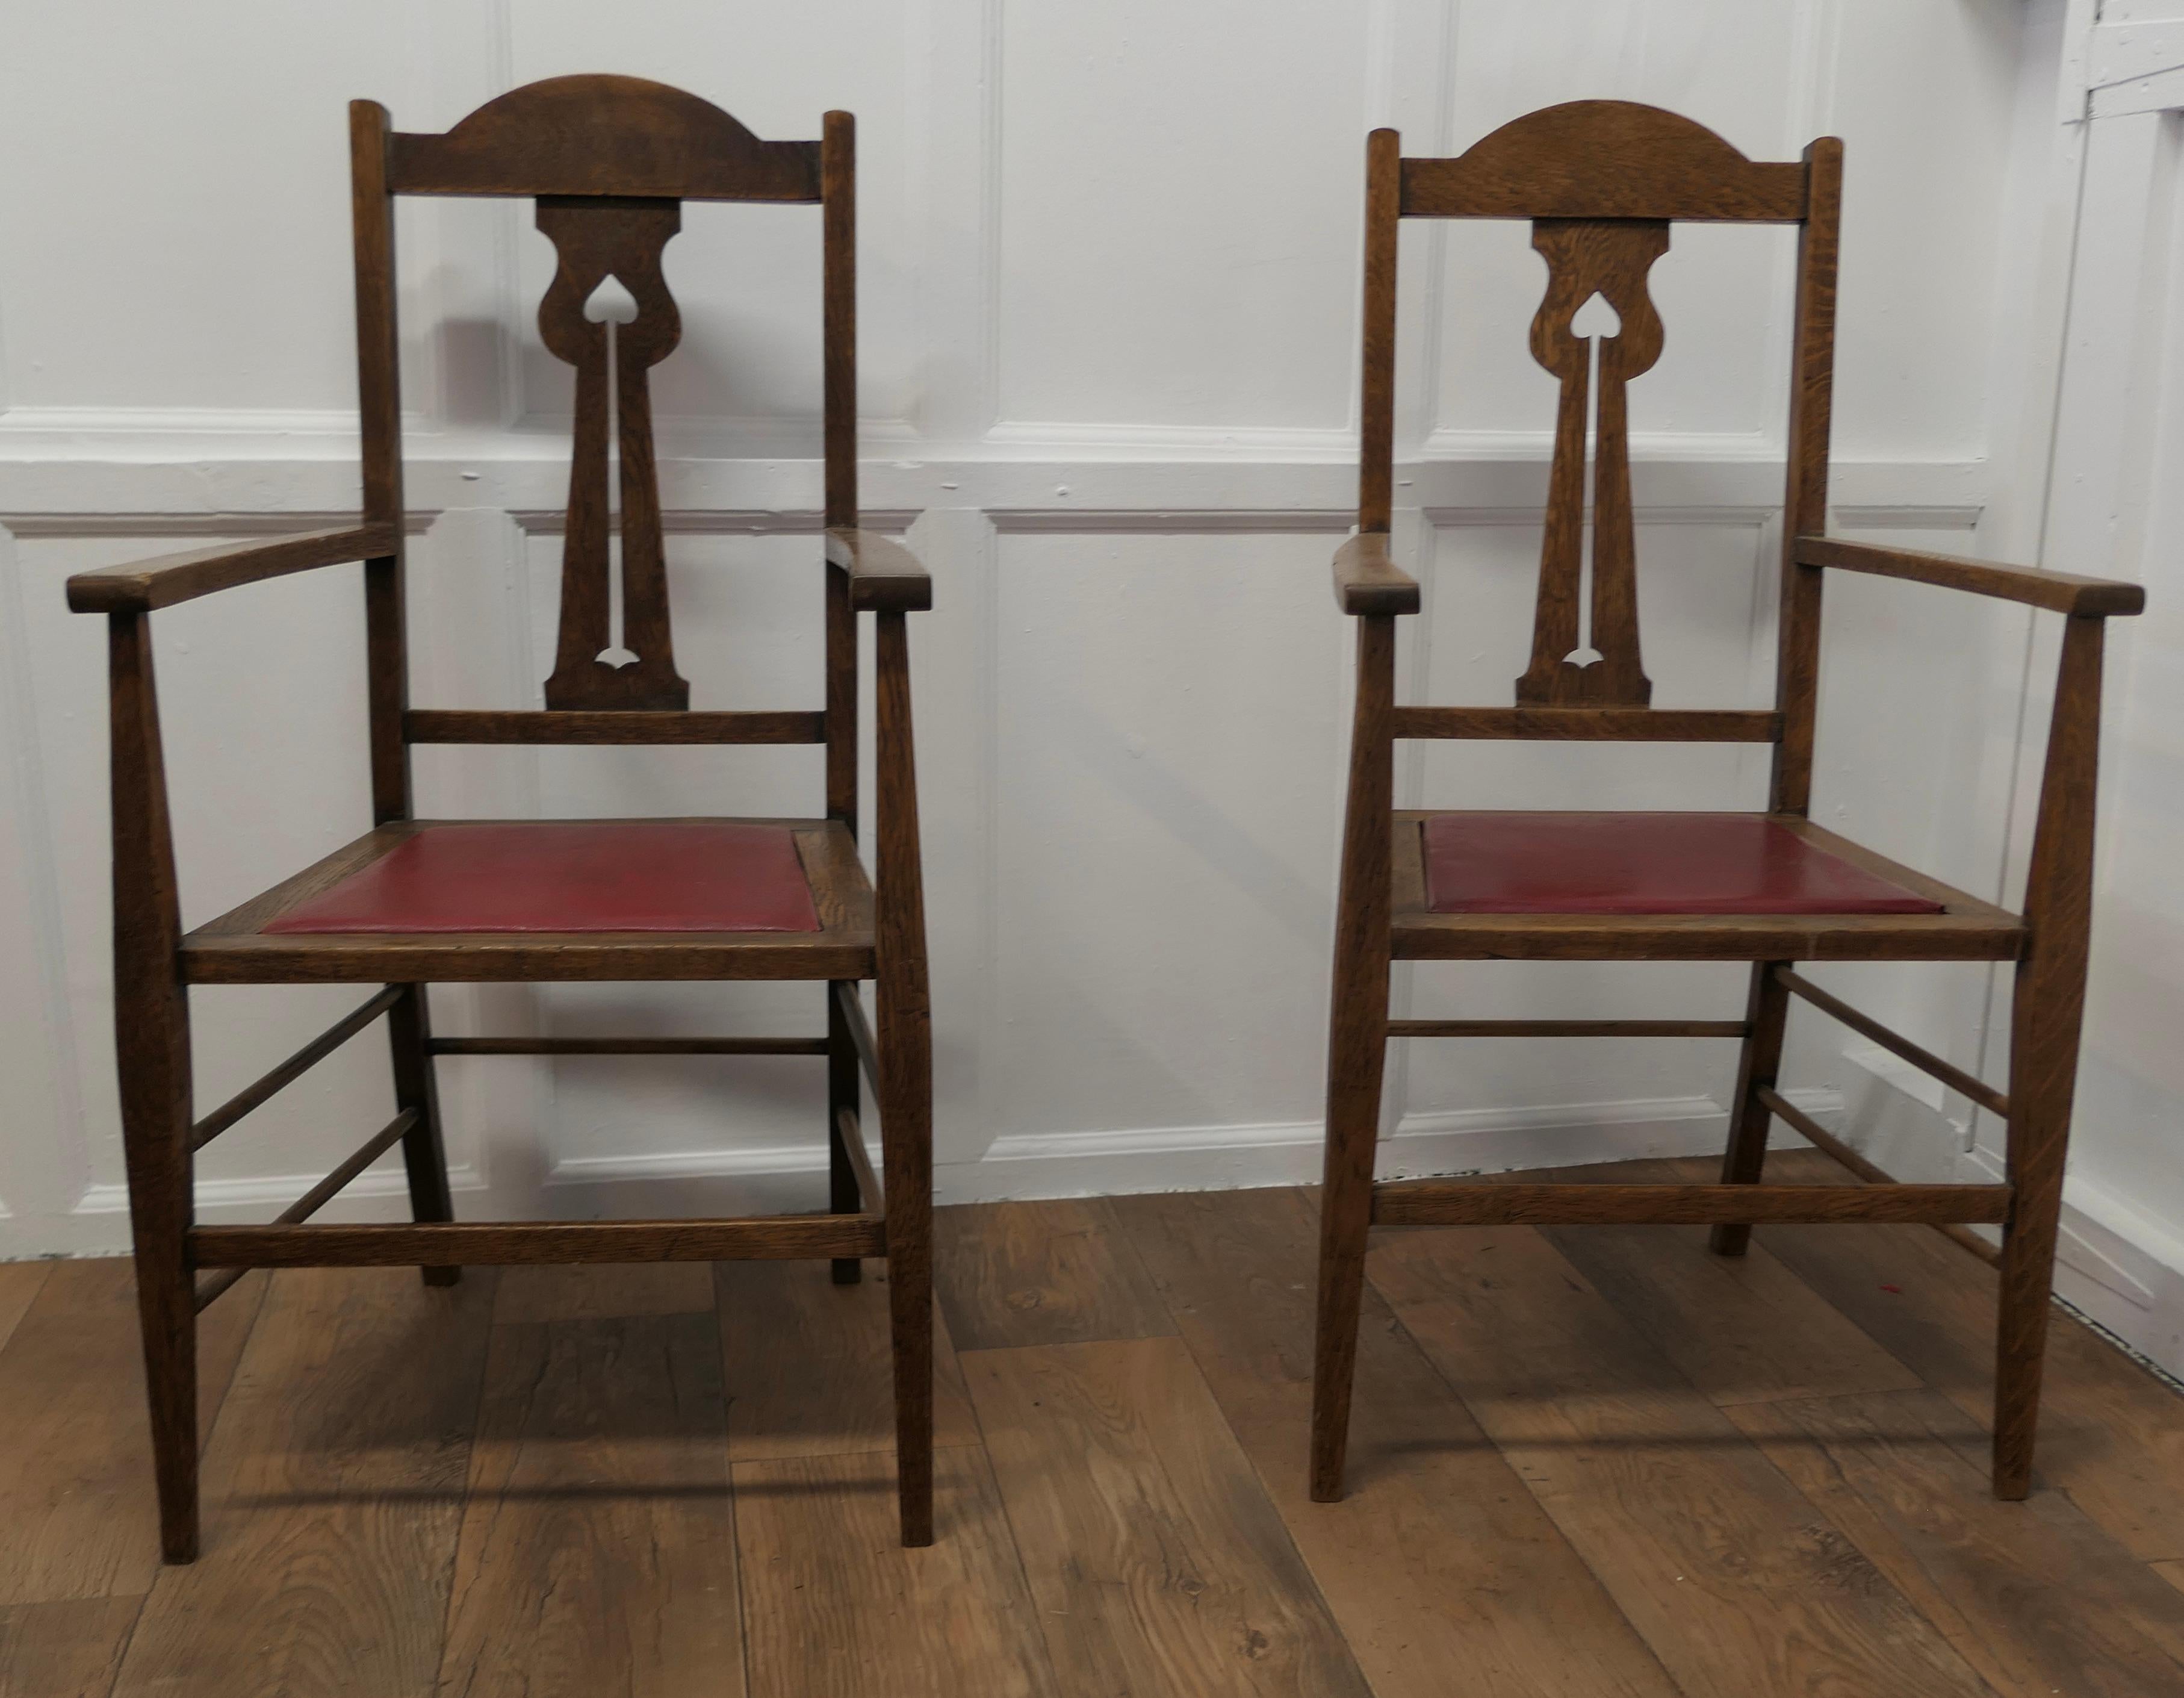 Pair of Excellent Quality Arts and Crafts Oak Carver Chairs

A good pair of chairs very stout and sturdy, in the Arts and Crafts style with an interesting geometric pierced back splat, the Oak has a lovely patina and the upholstery is good 
The